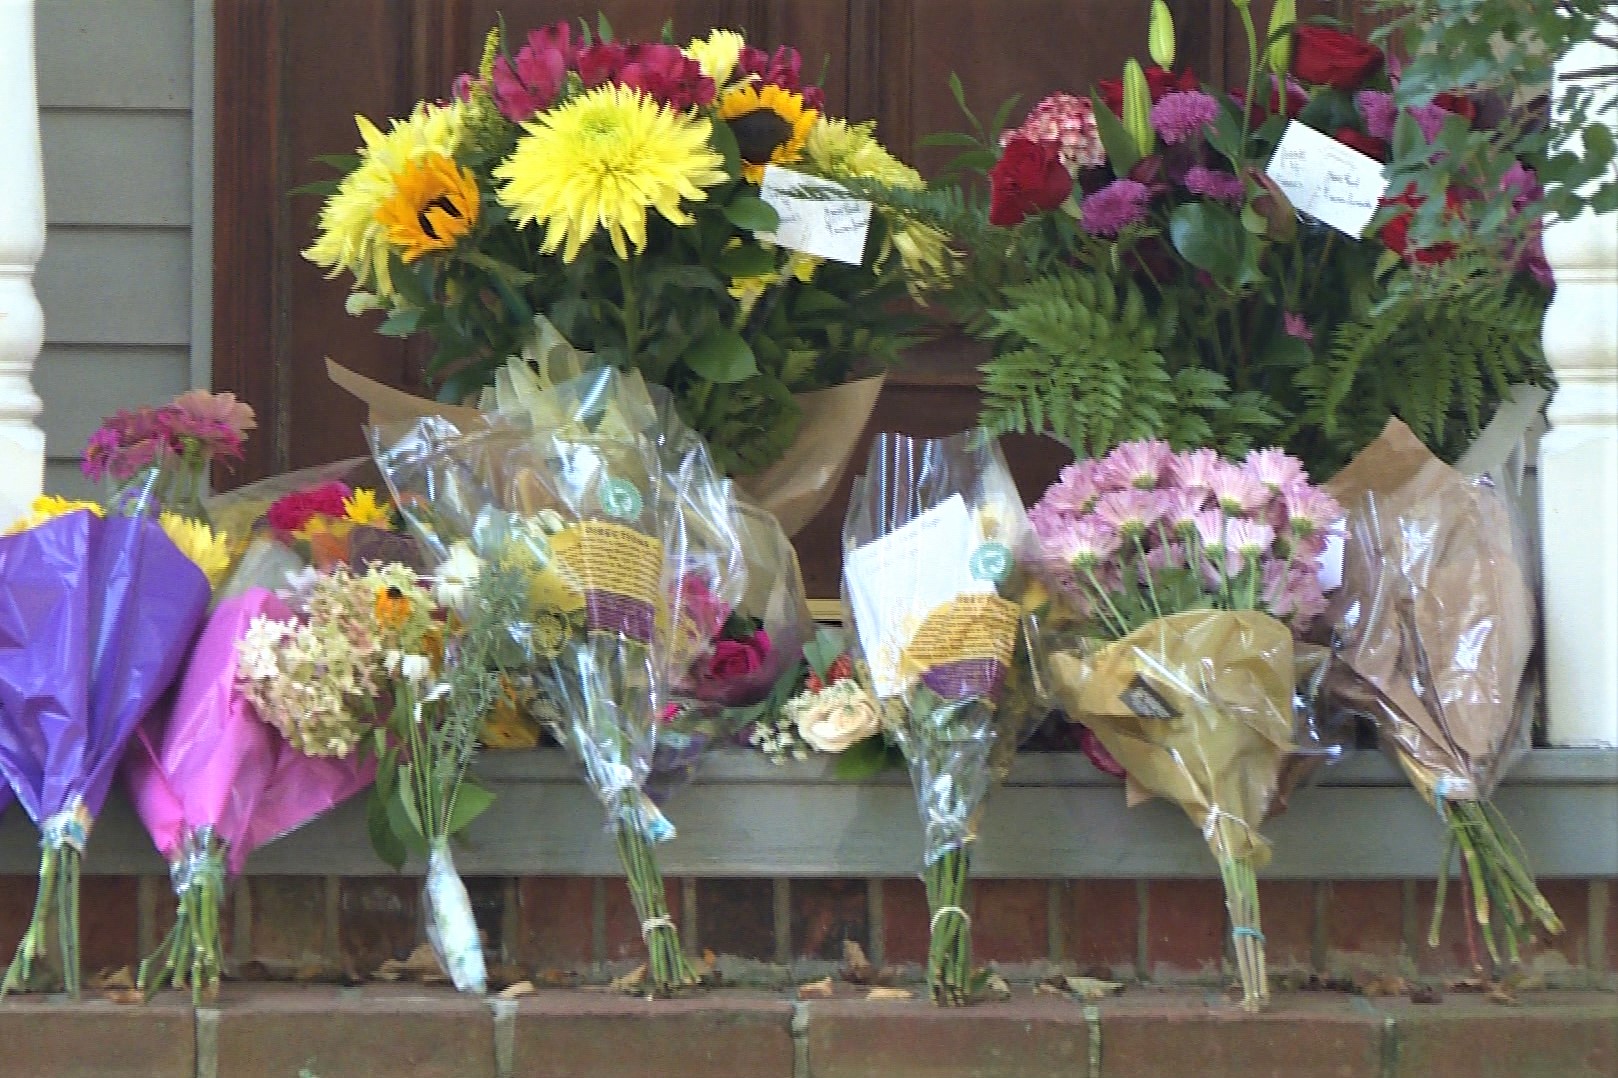 Flowers sit on the front steps of the Mumper family home in Bloomington.